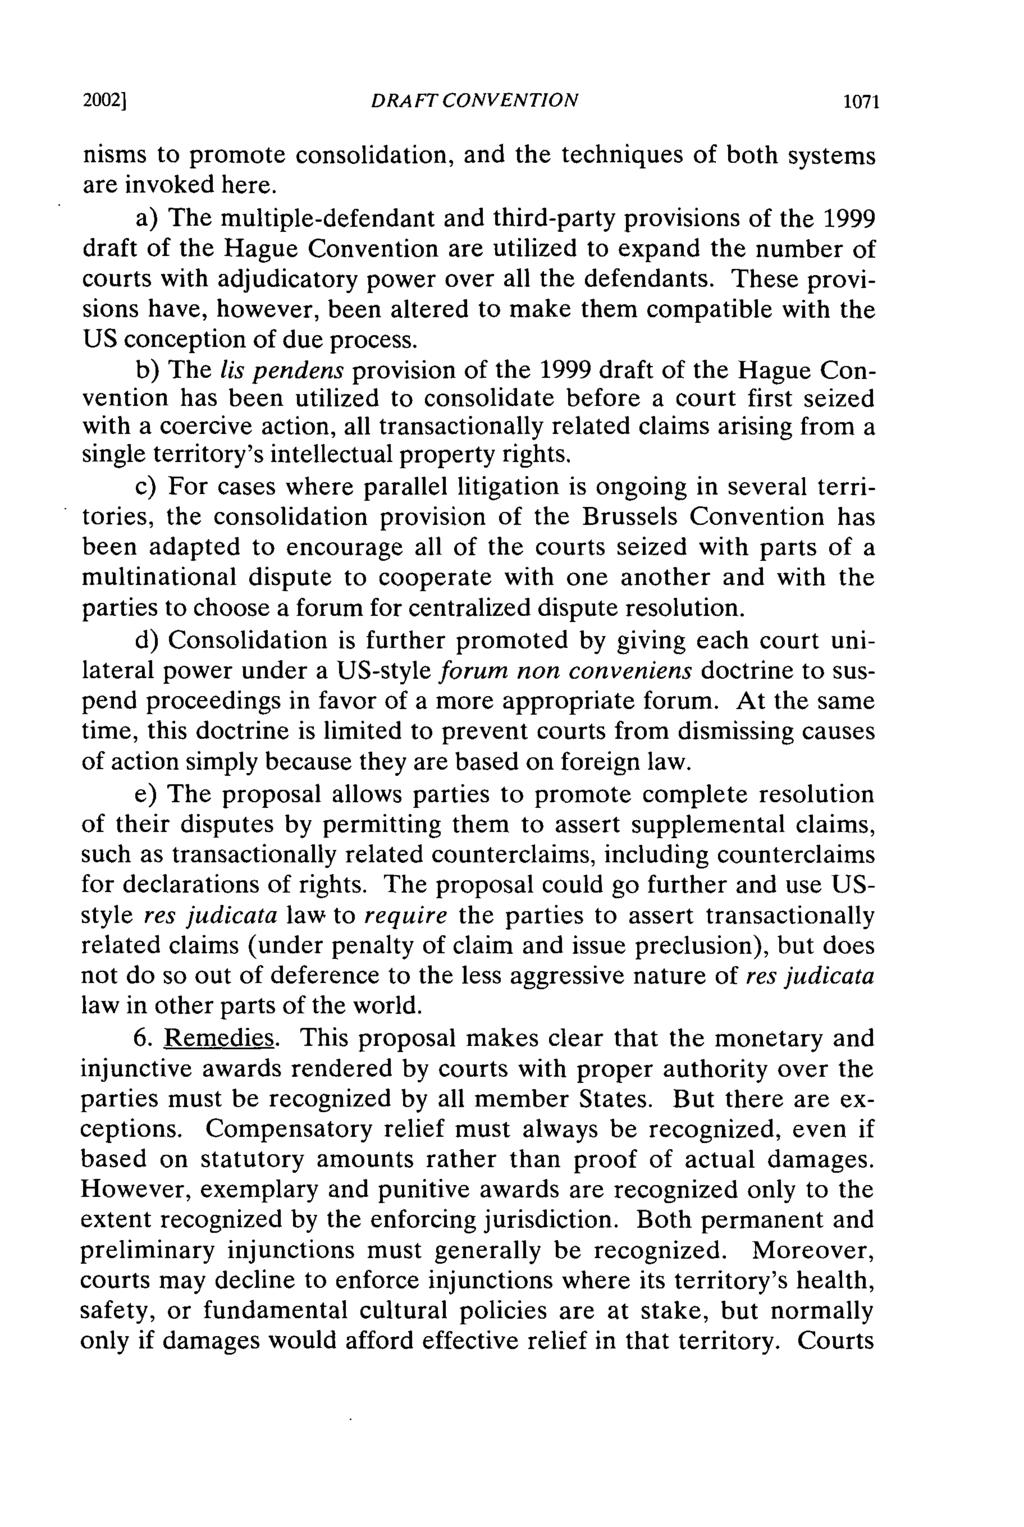 20021 DRA FT CONVENTION nisms to promote consolidation, and the techniques of both systems are invoked here.